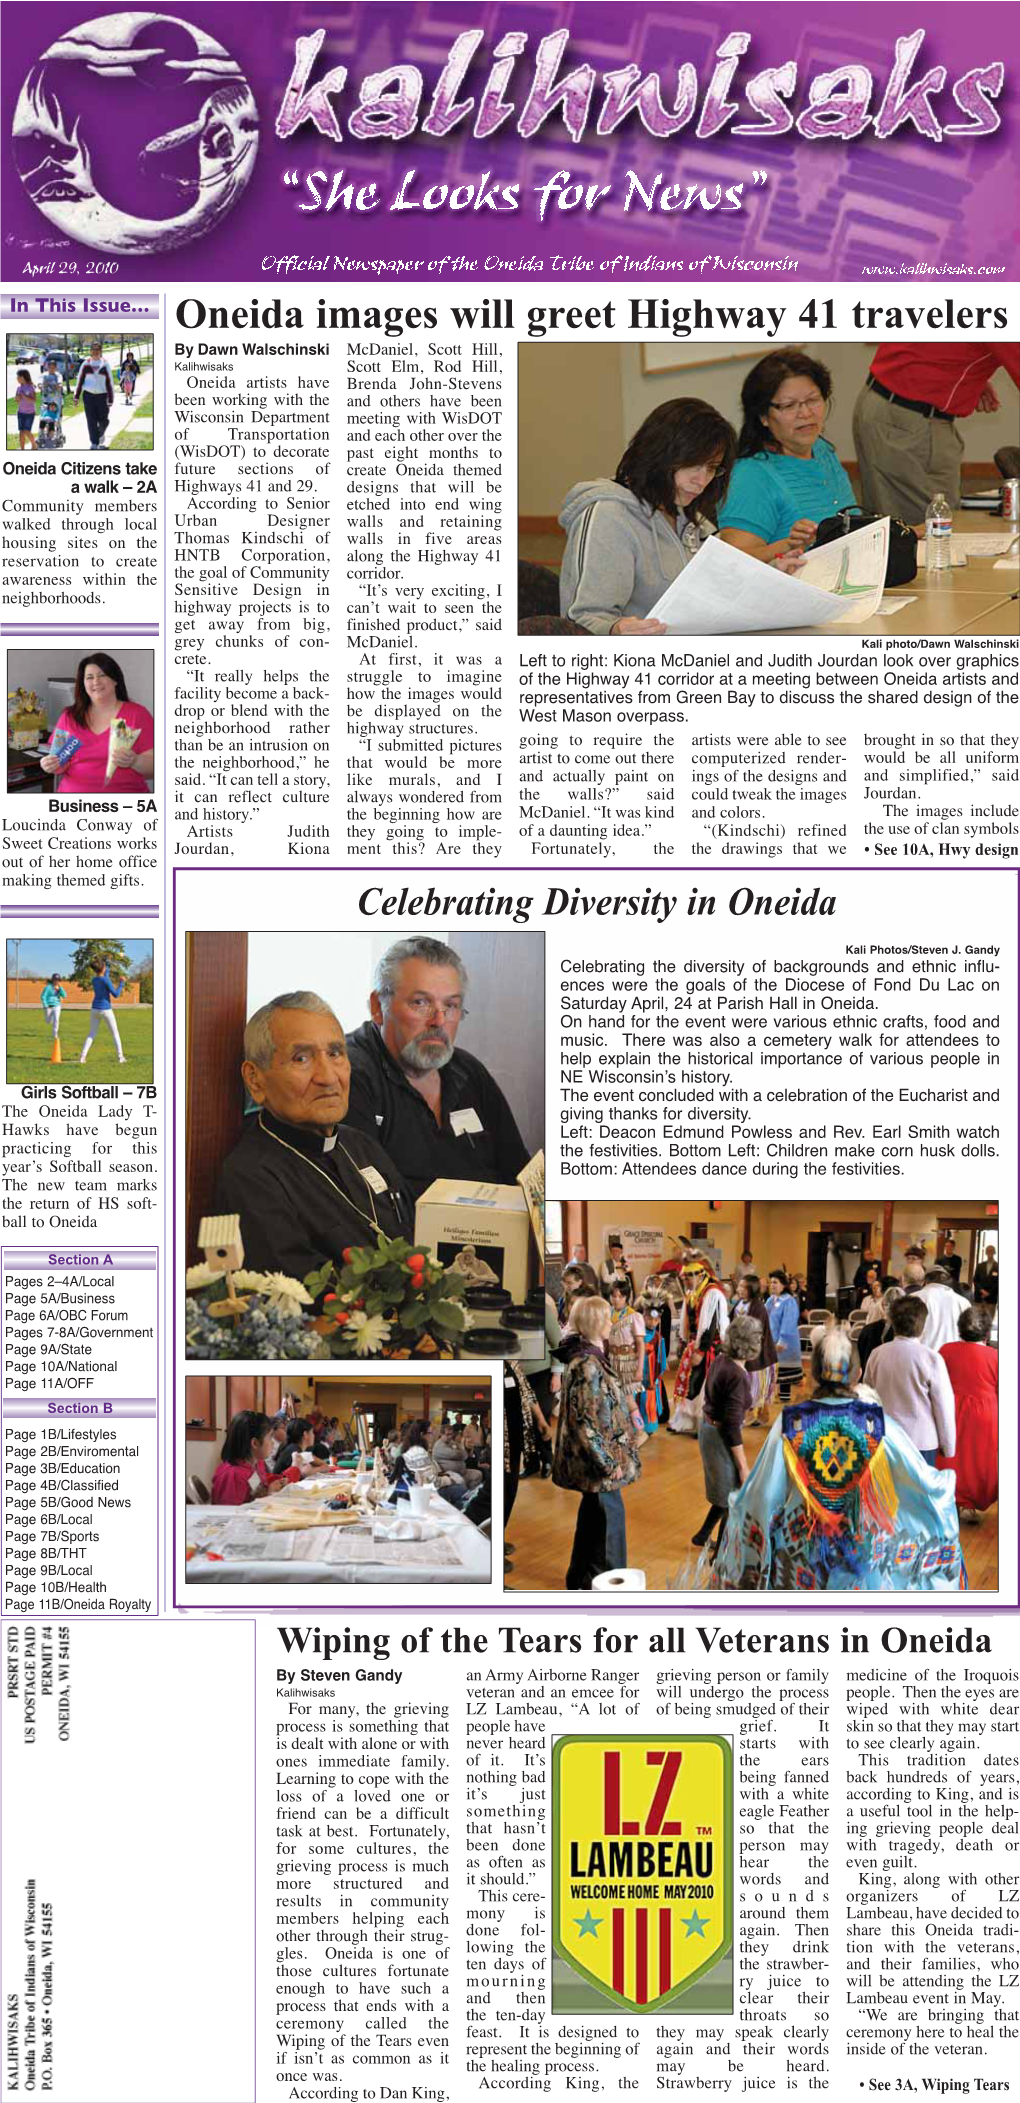 In This Issue… Oneida Images Will Greet Highway